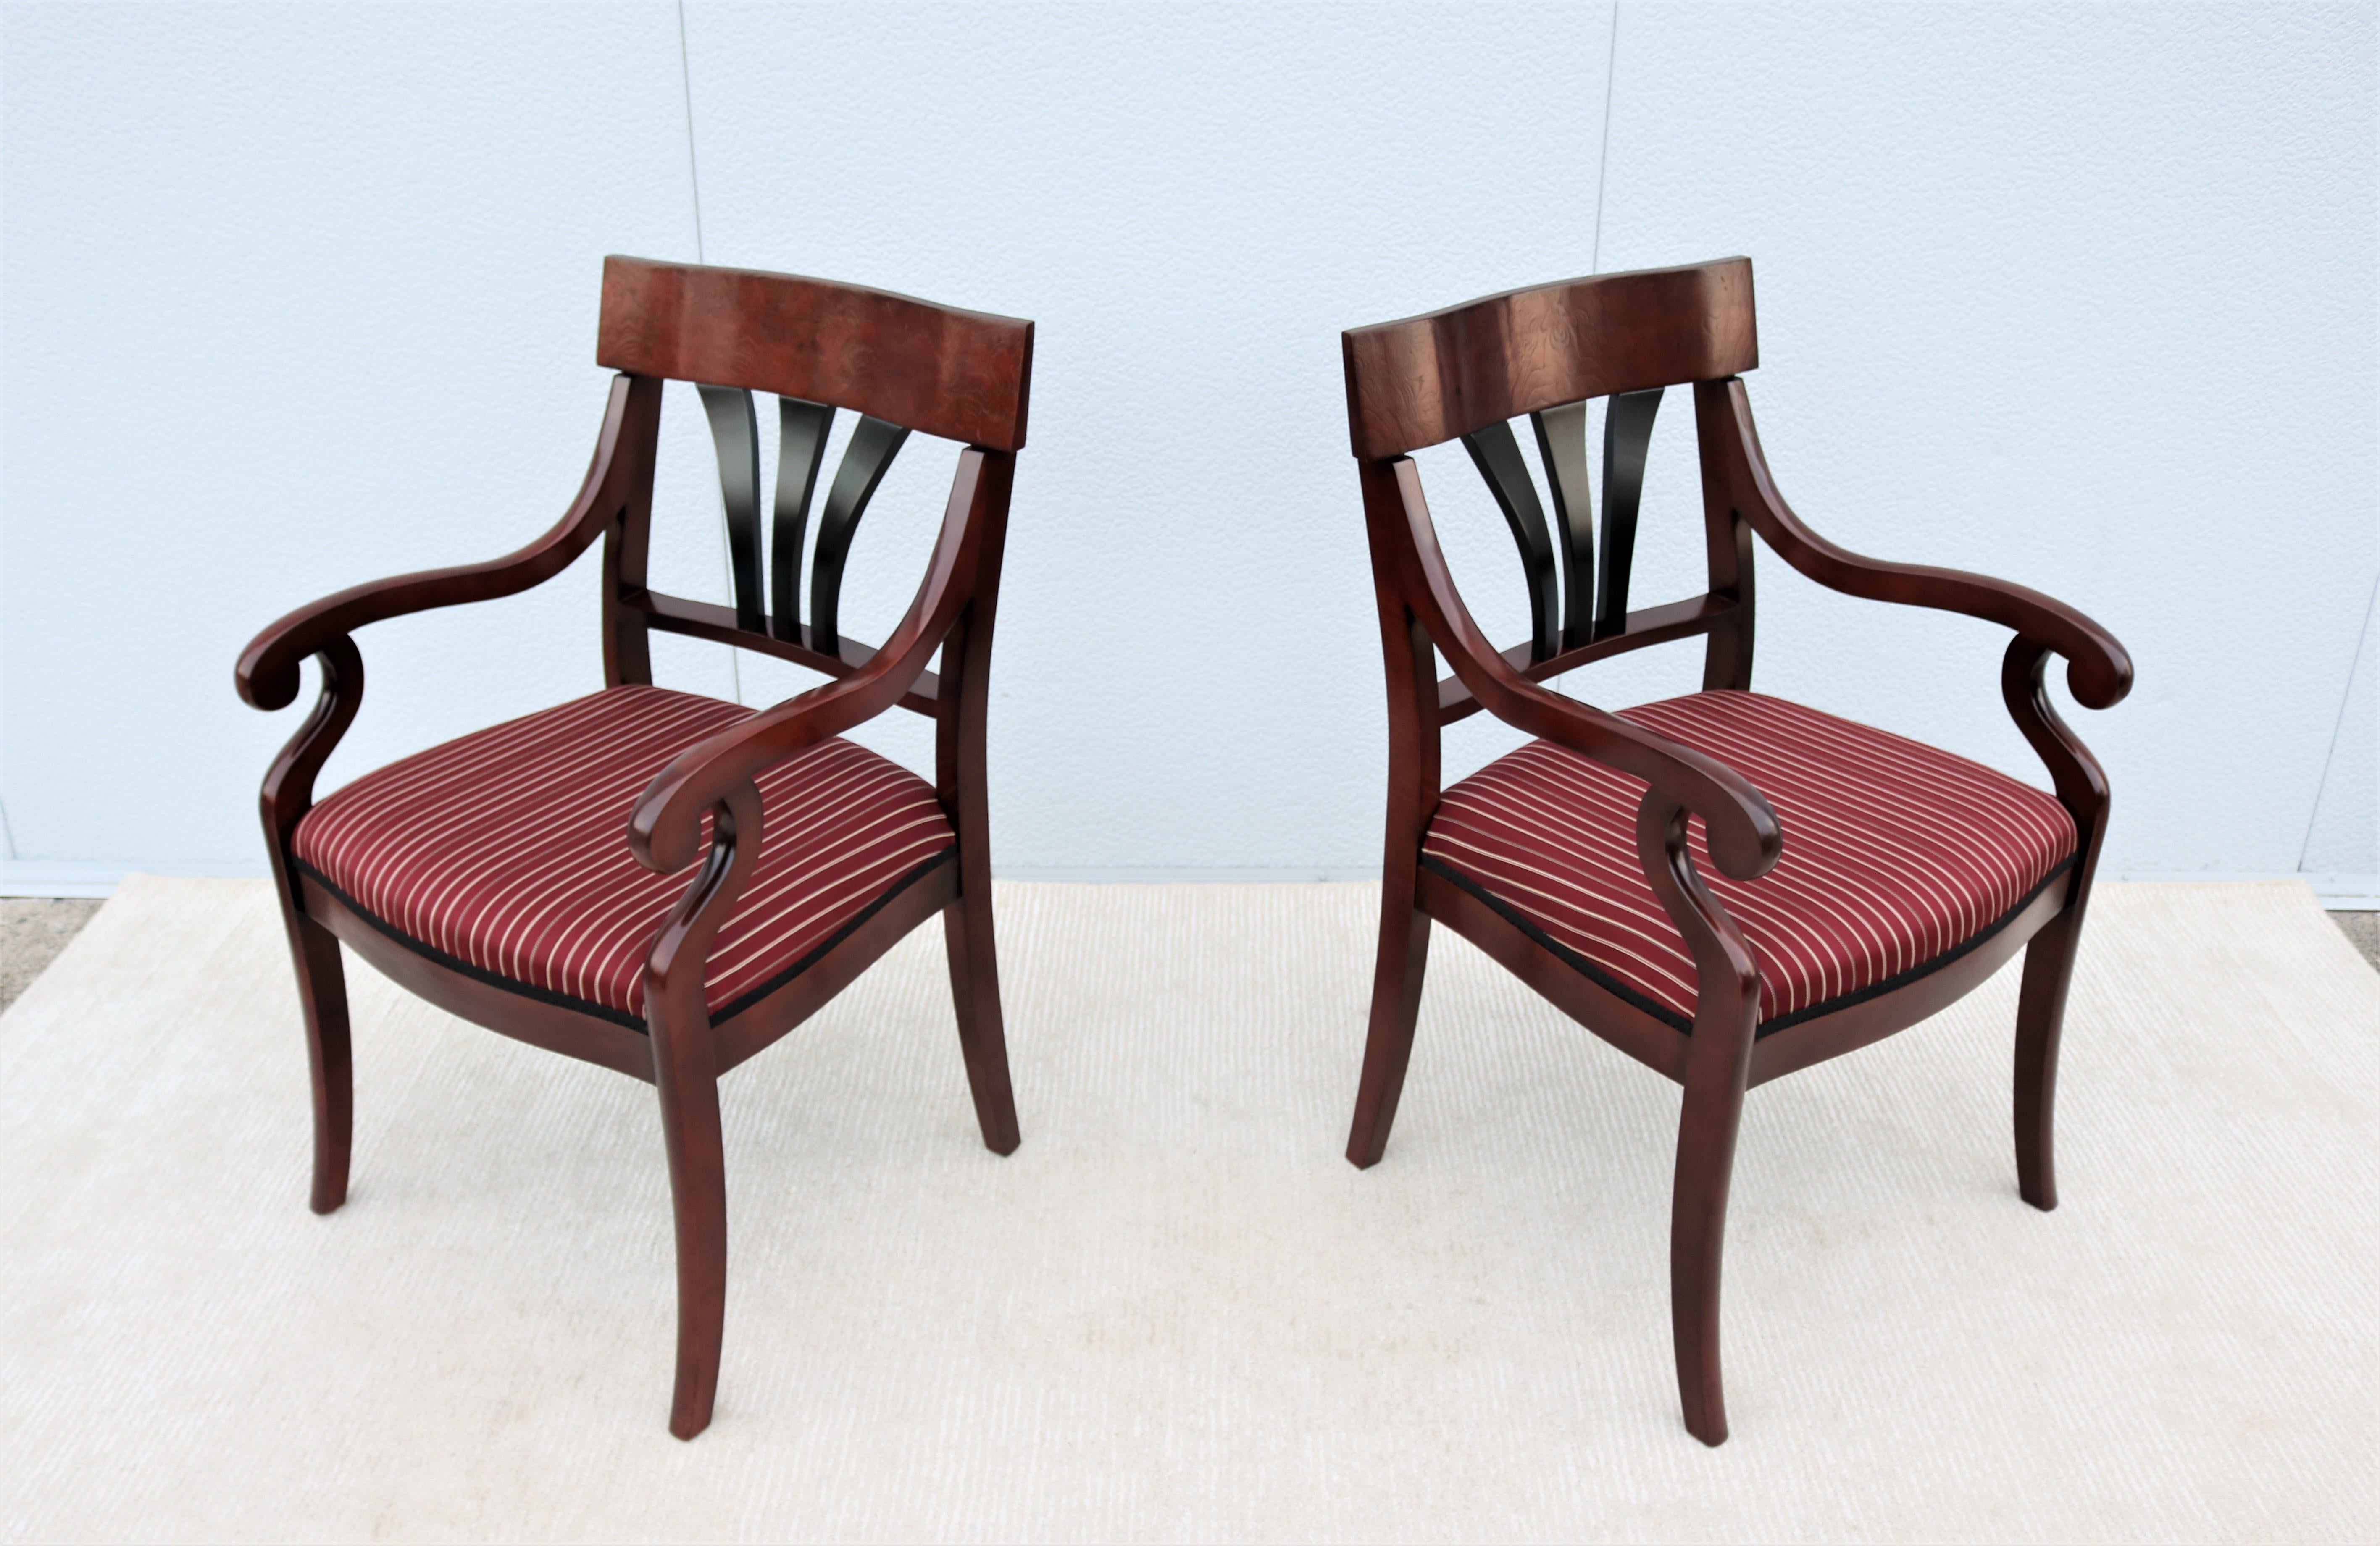 Fabulous pair of Innsbruck and Osterley Park guest visitor side chairs.
The strength and character of 19th century elegant Biedermeier neoclassic style finds renewed expression in Innsbruck and Osterley Park. 
Michael Tatum and Robert Purdom